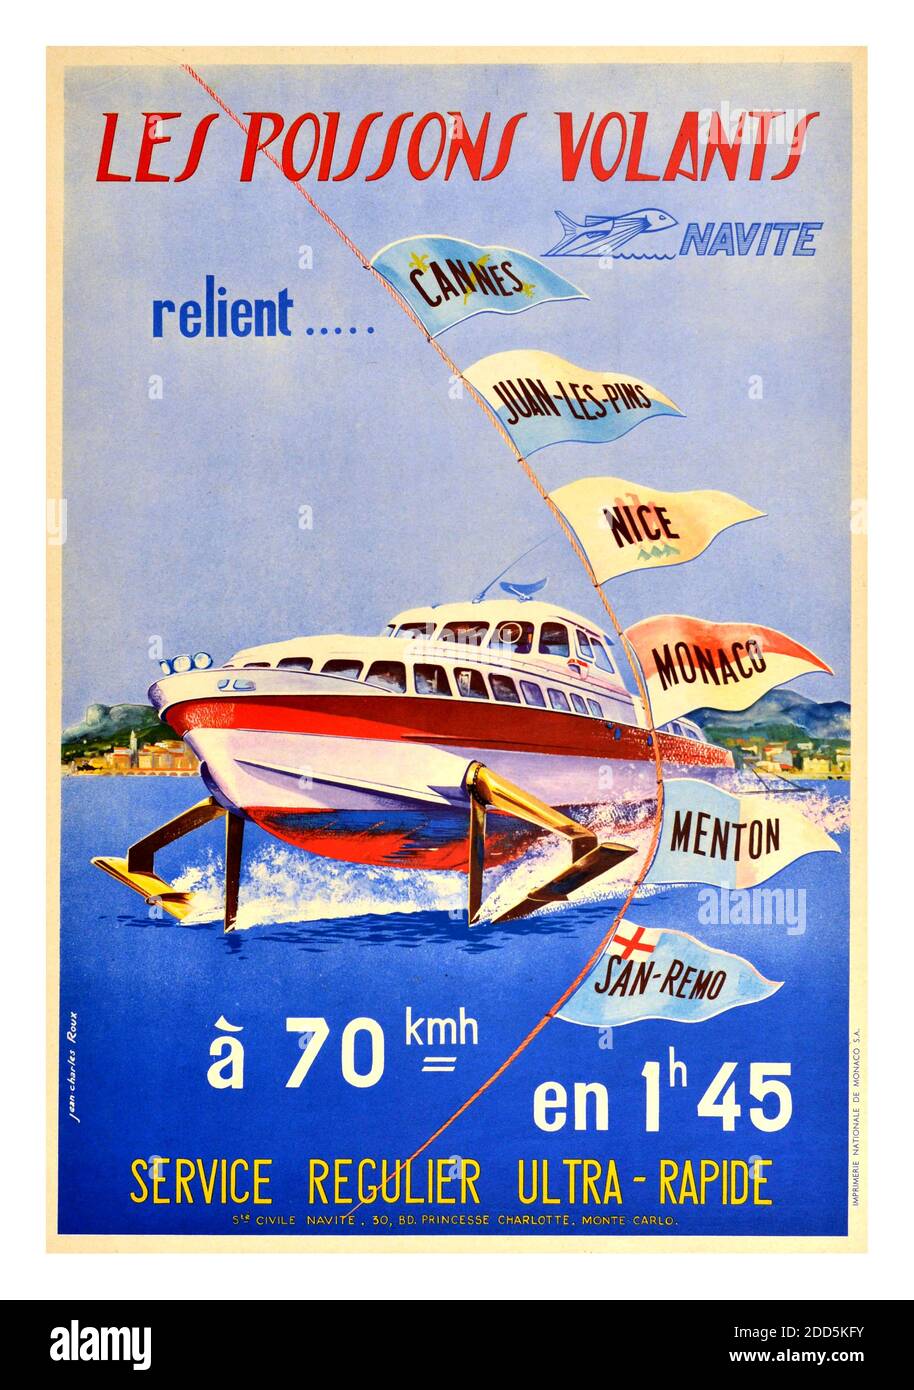 LES POISSONS VOLANTS Vintage 1950's French advertising boat travel poster  for Les Poissons Volants / The Flying Fish - Ultra Fast and Regular Service  - design by Jean Charles Roux features the